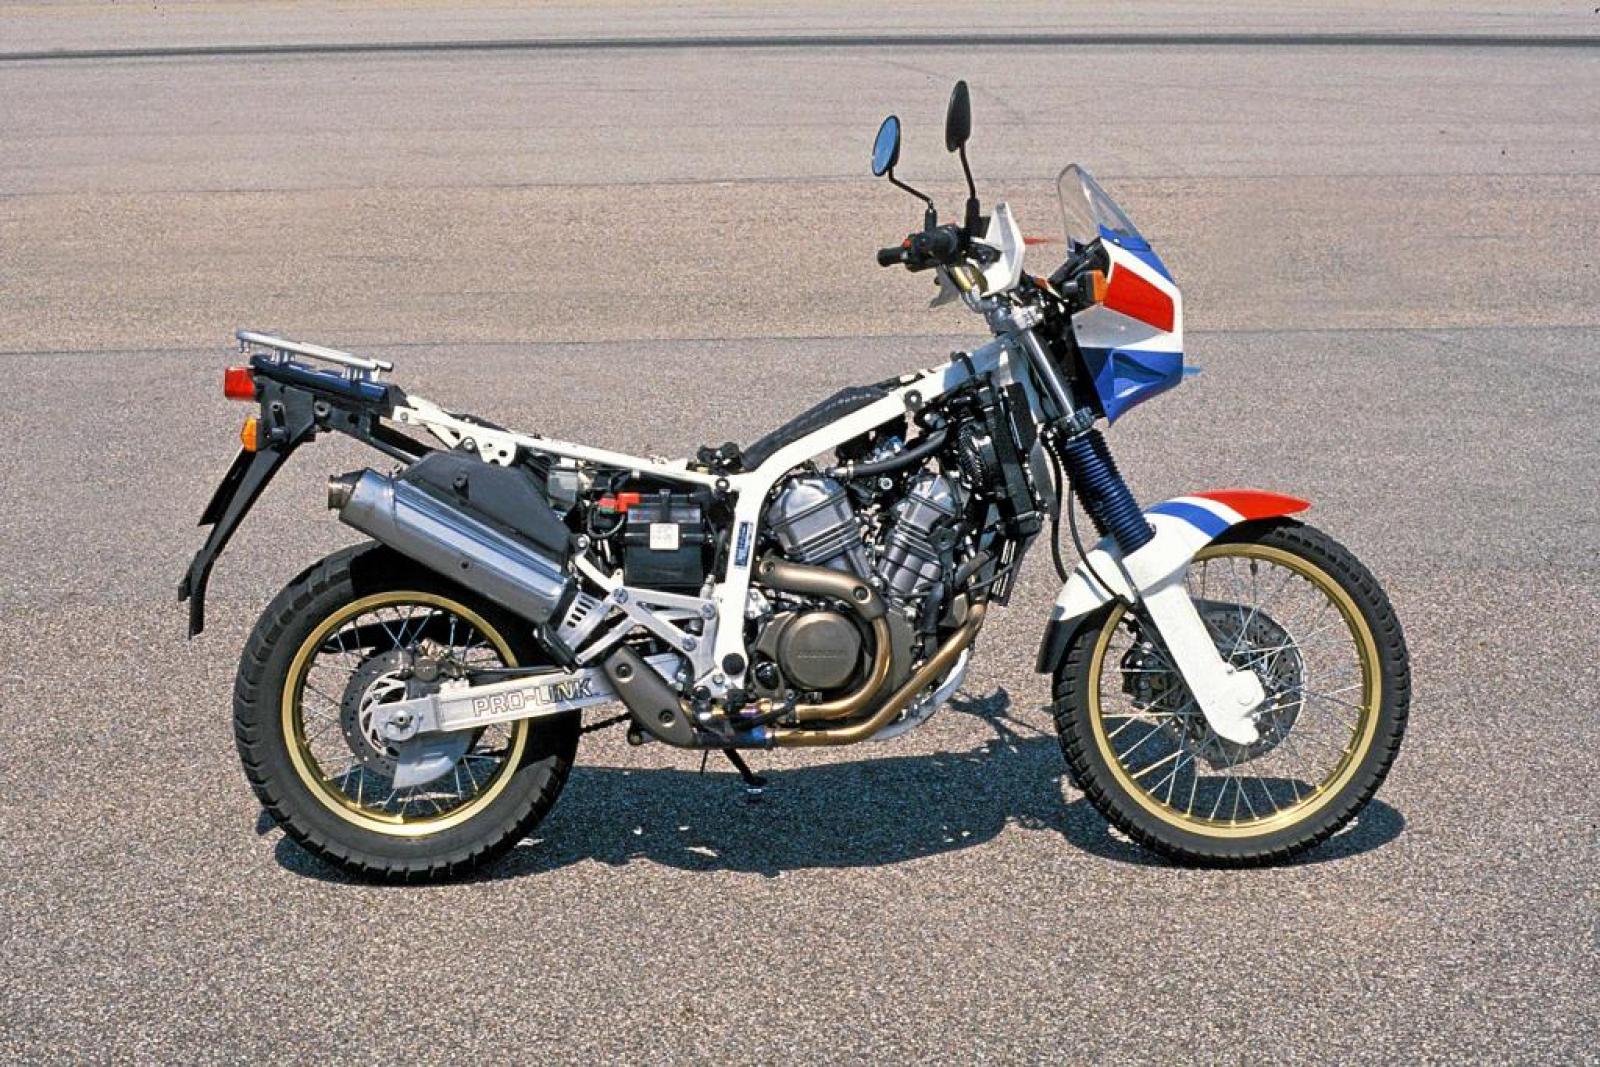 africa twin cafe racer